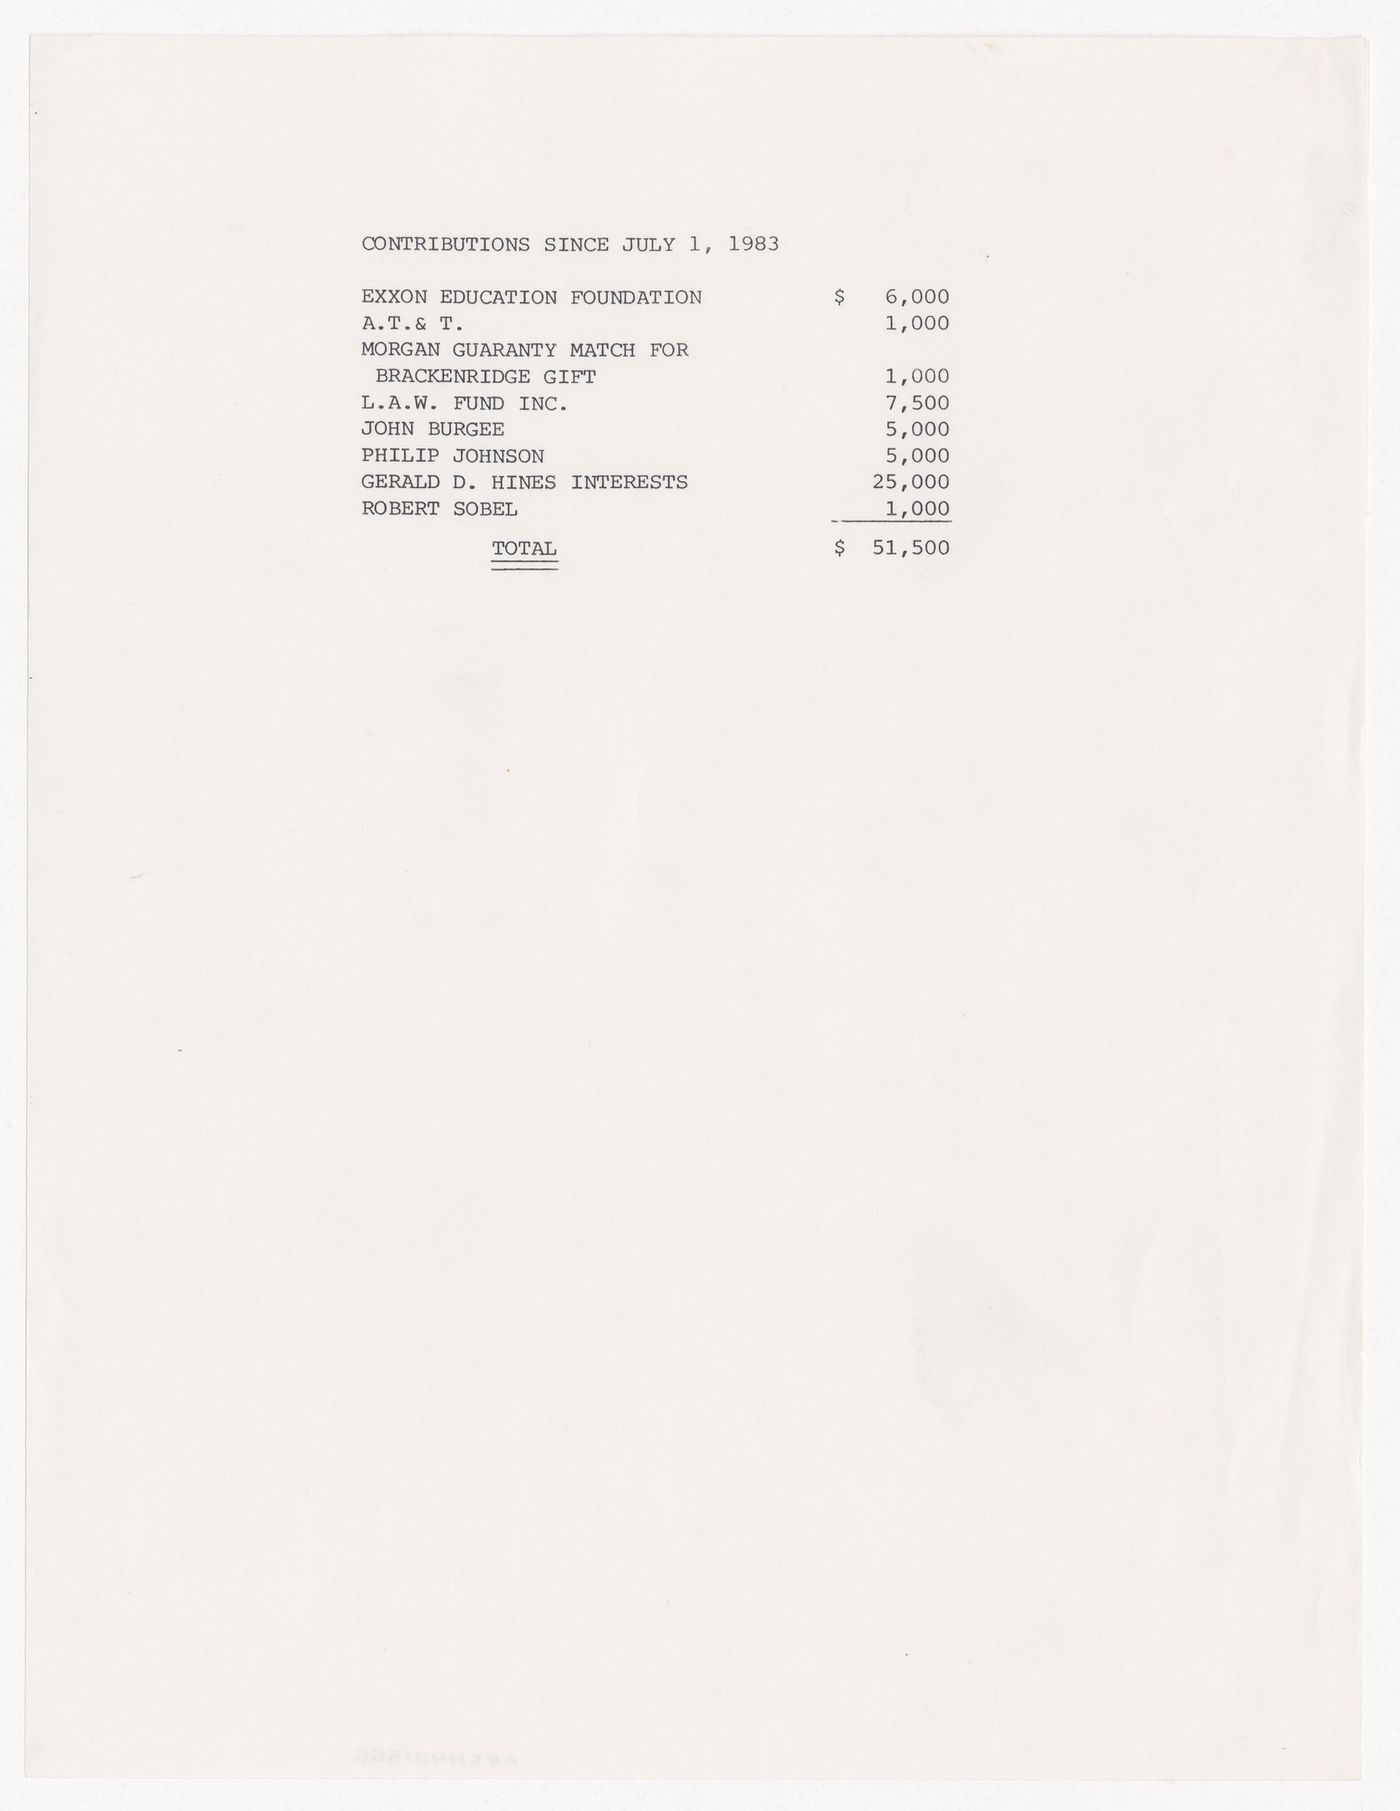 List of contributions since July 1st, 1983